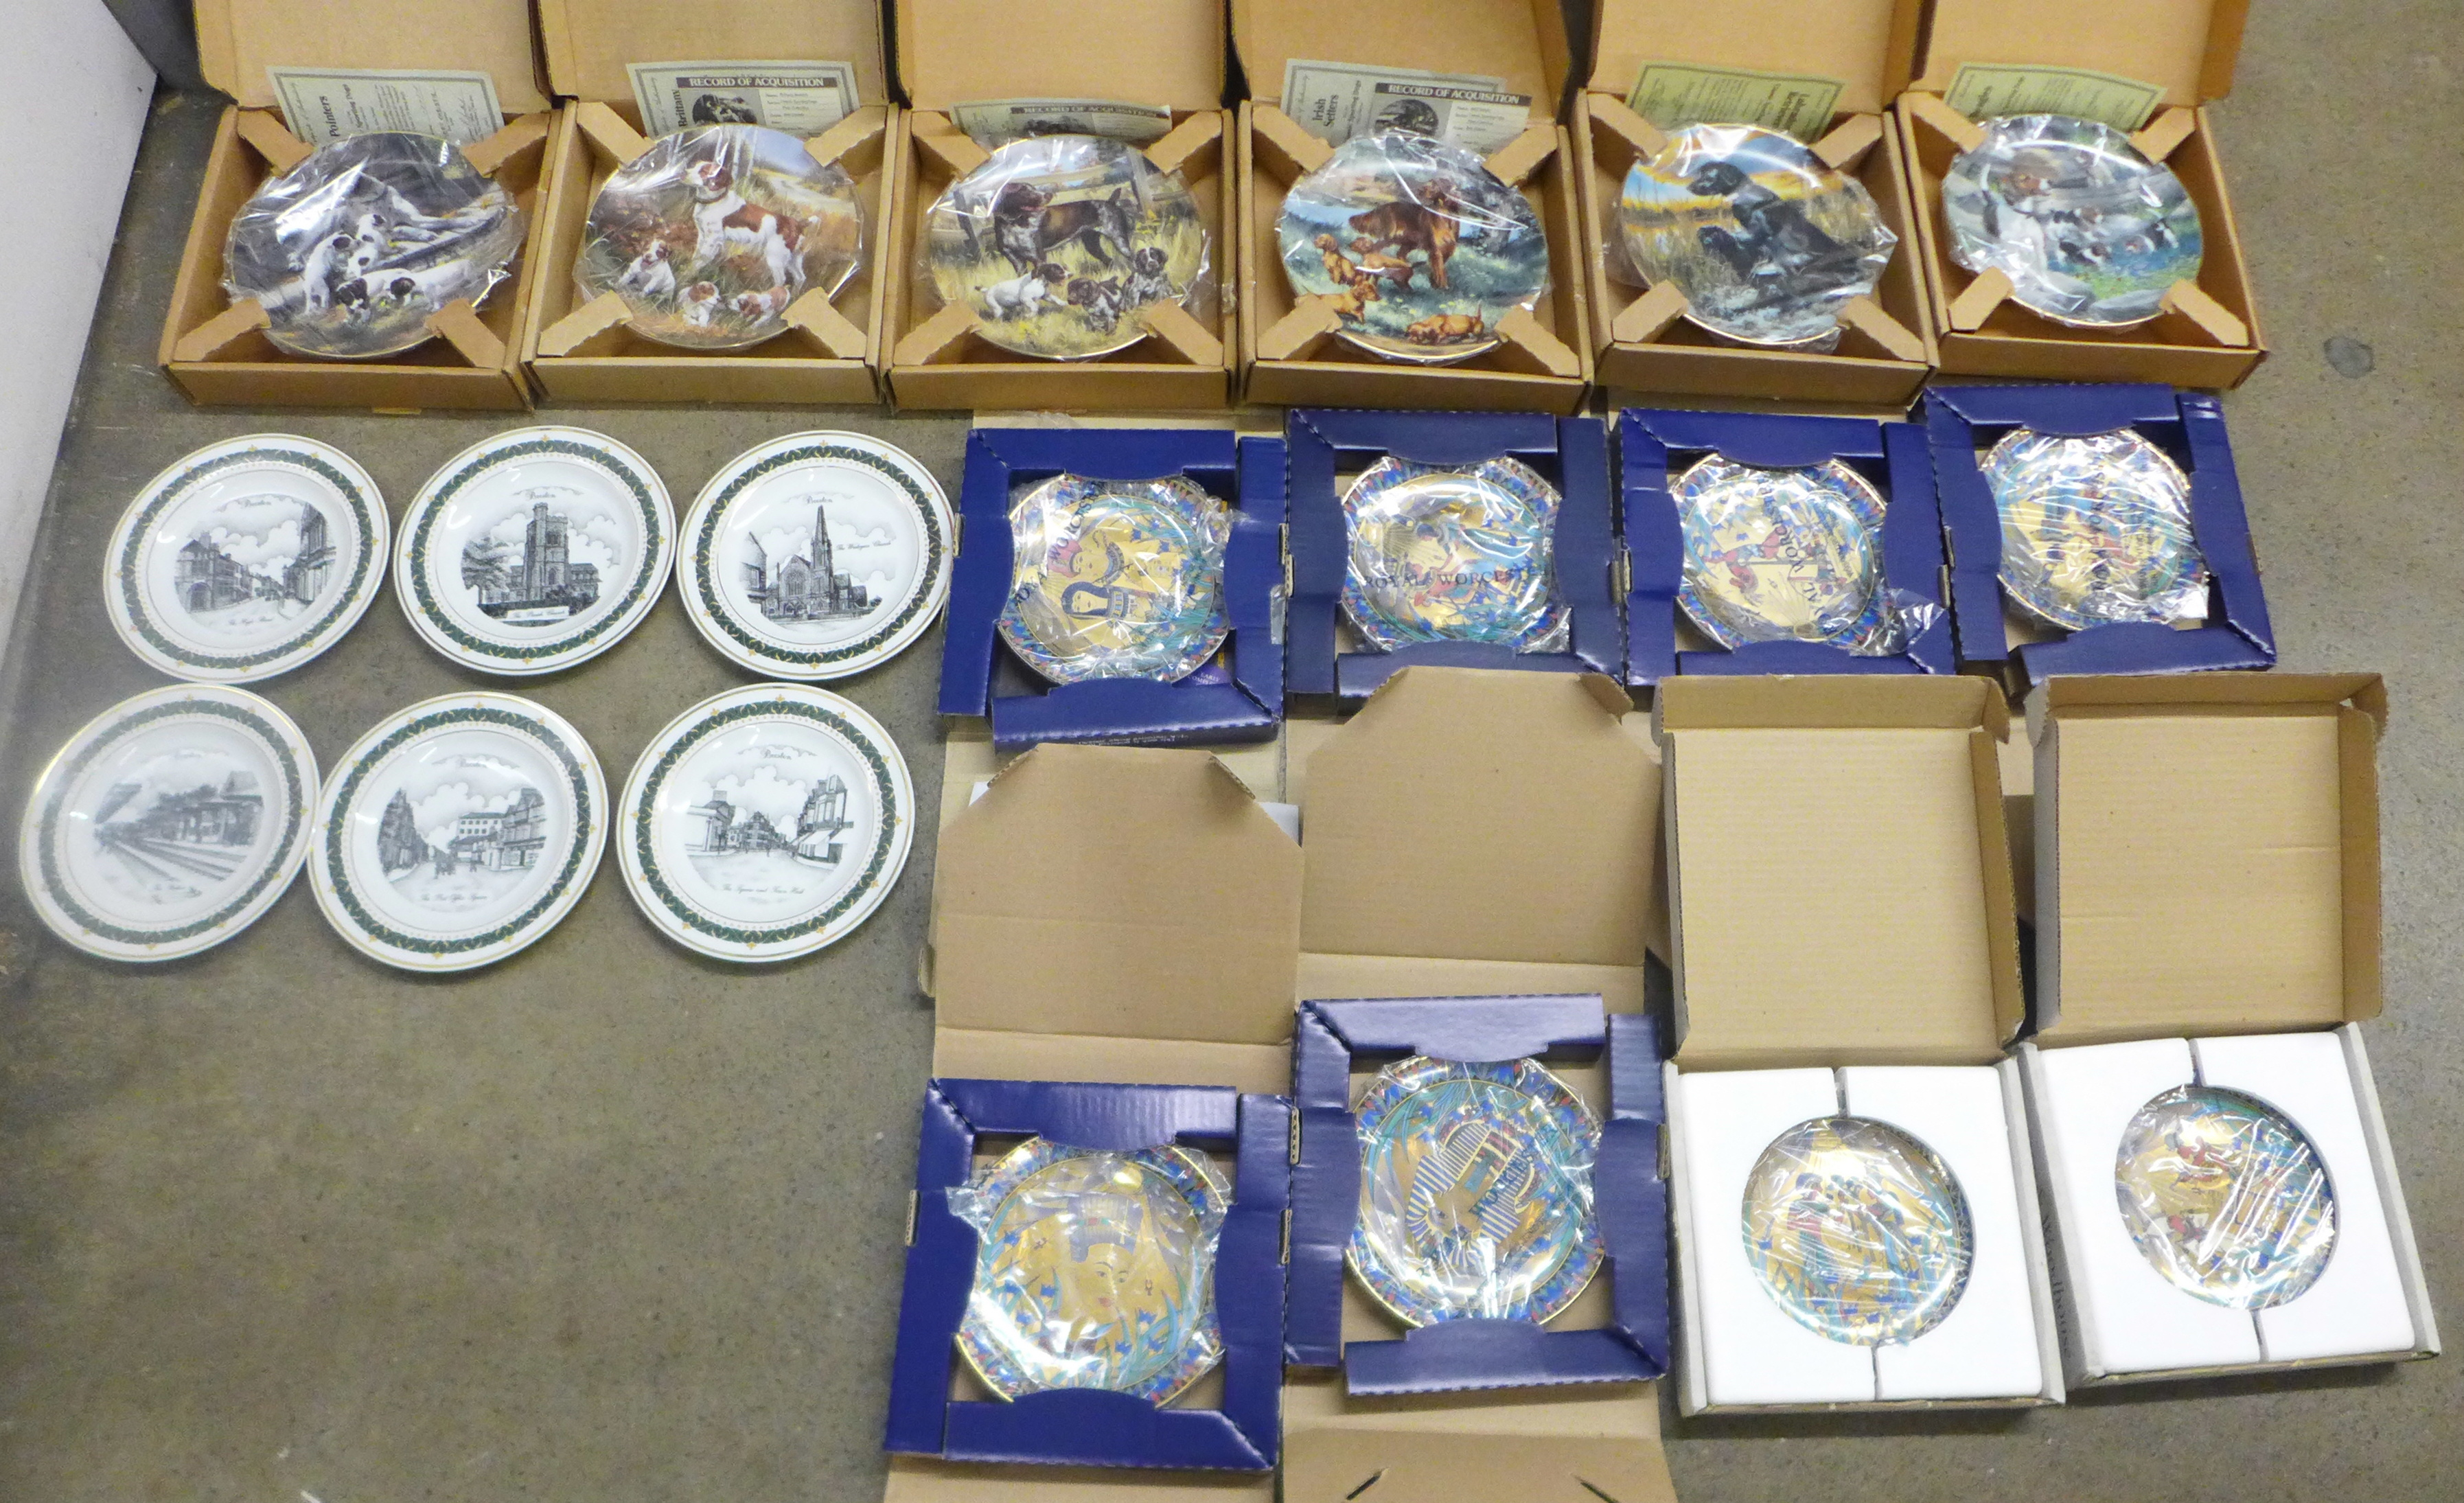 Thirty limited edition collectors plates including Legends of The Nile (4), Treasures of Tutankhamen